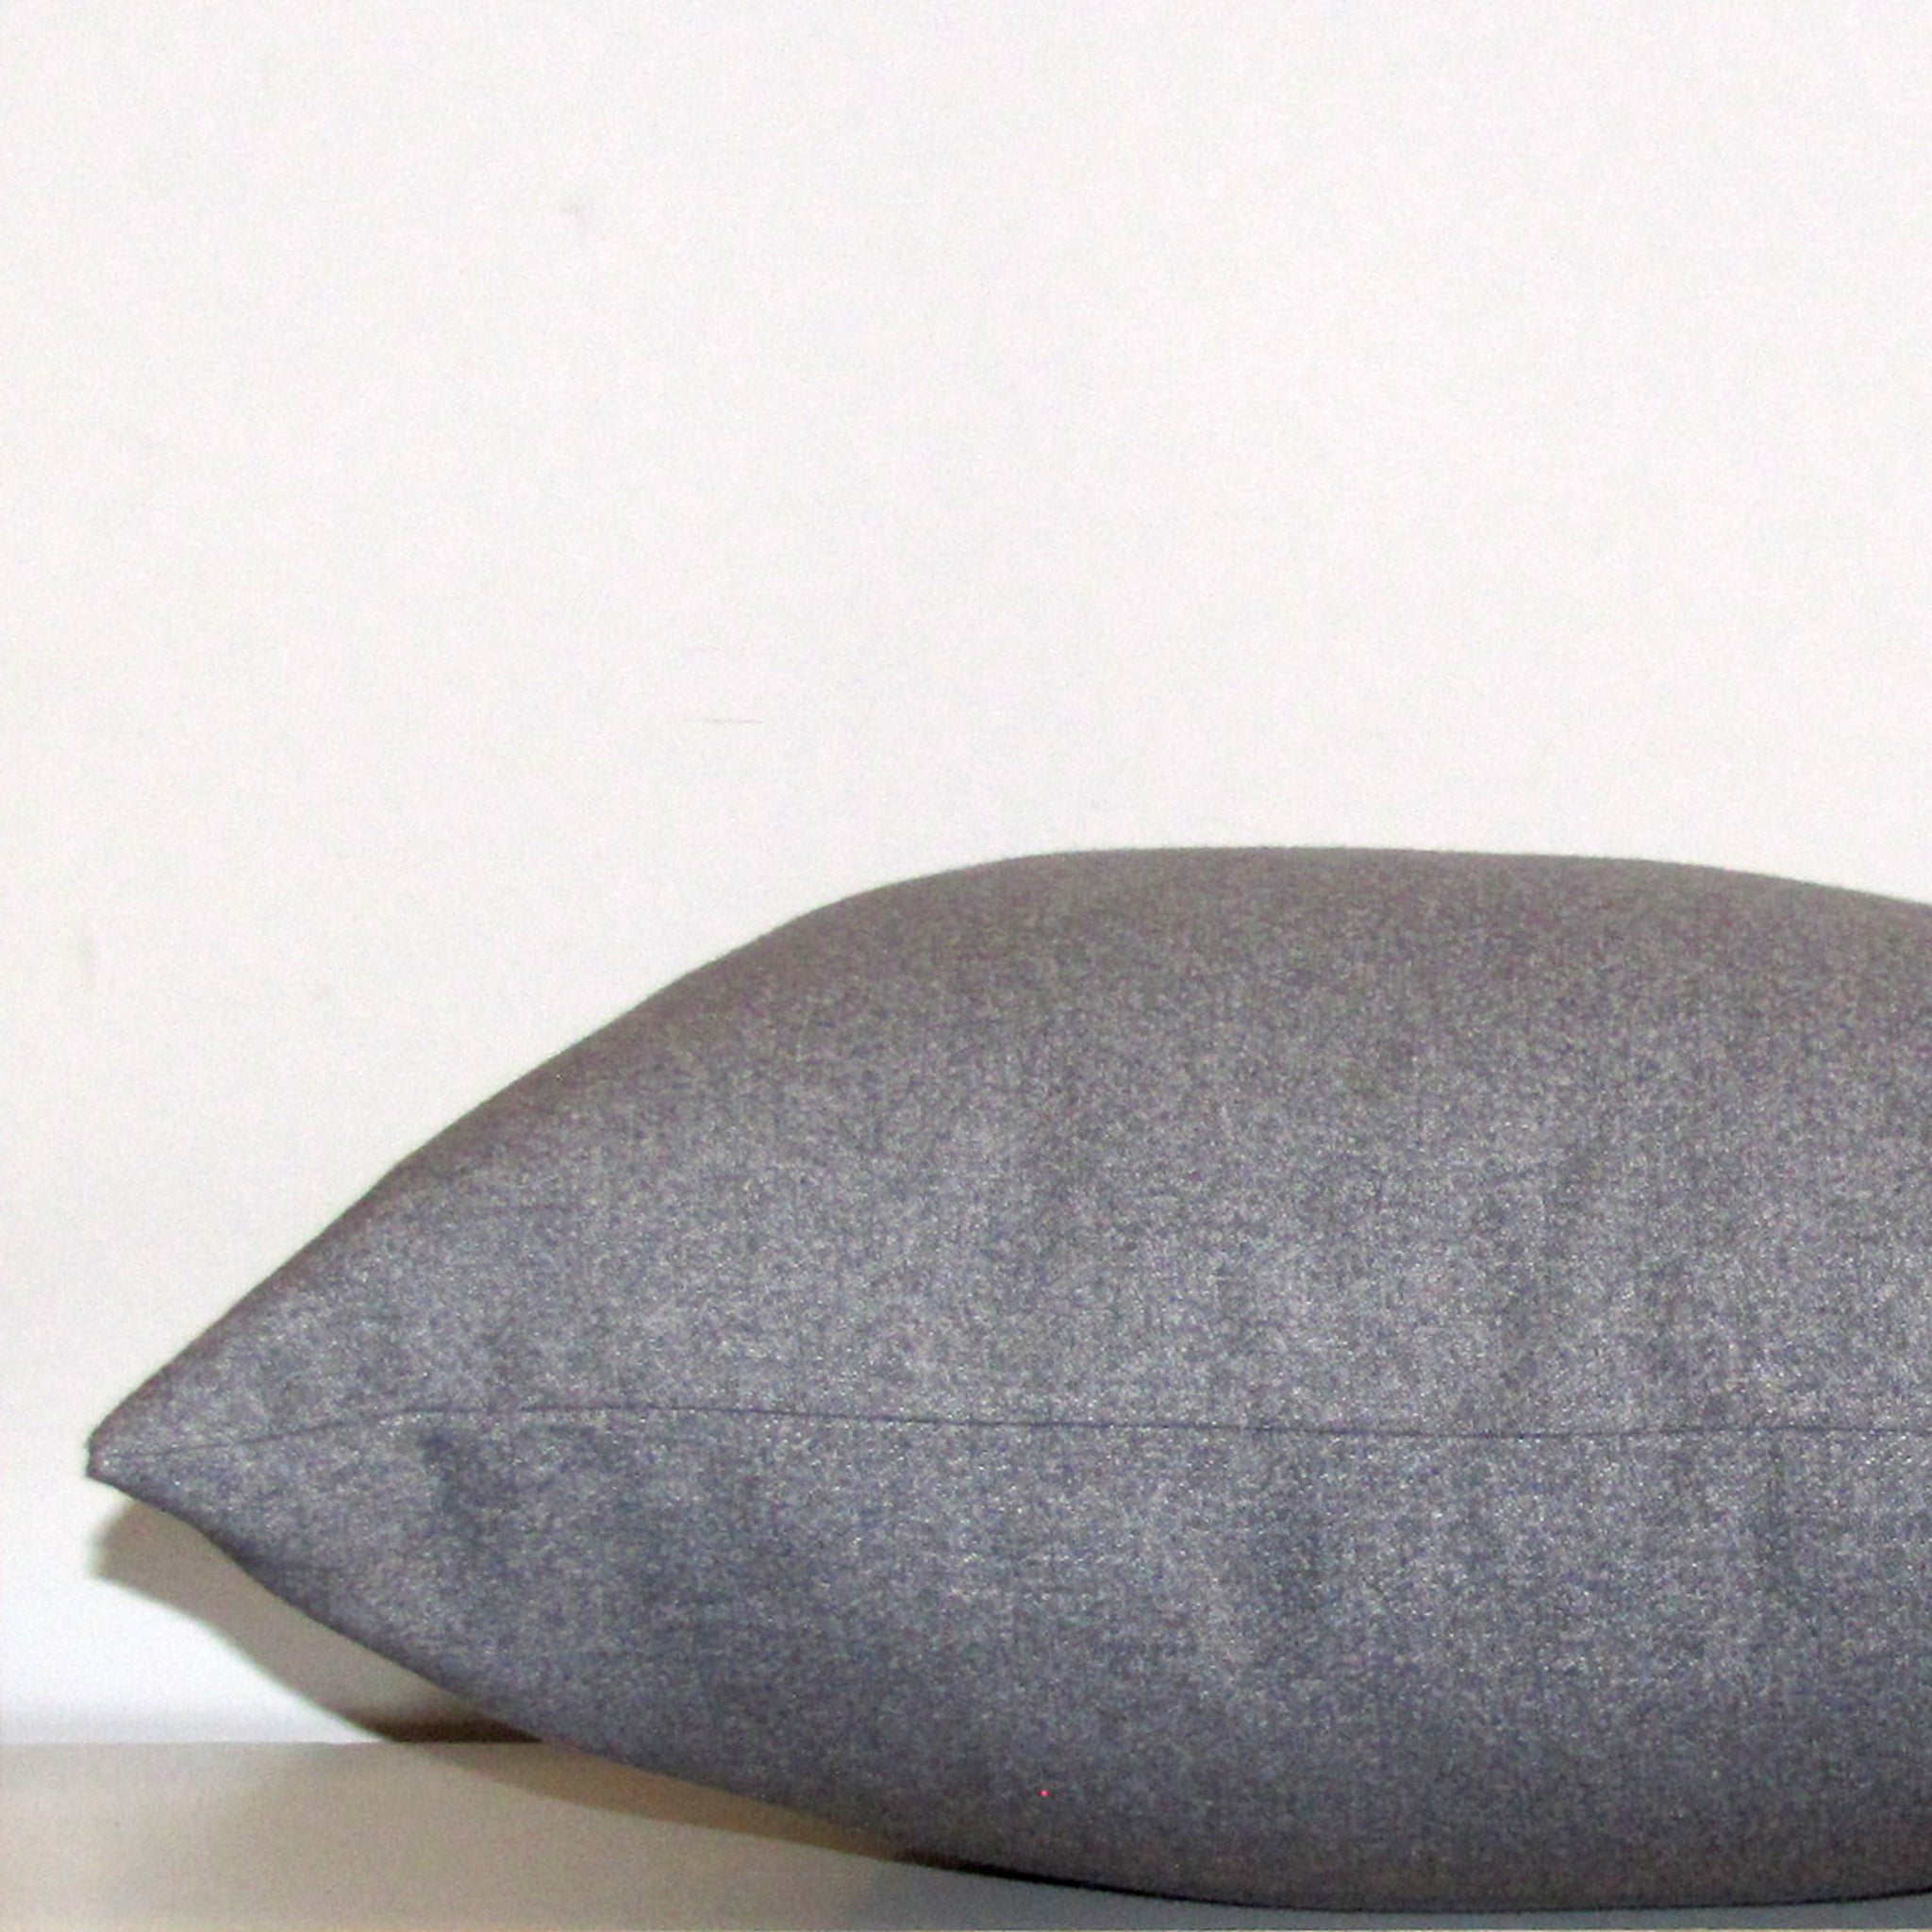 cement grey textured cushion cover